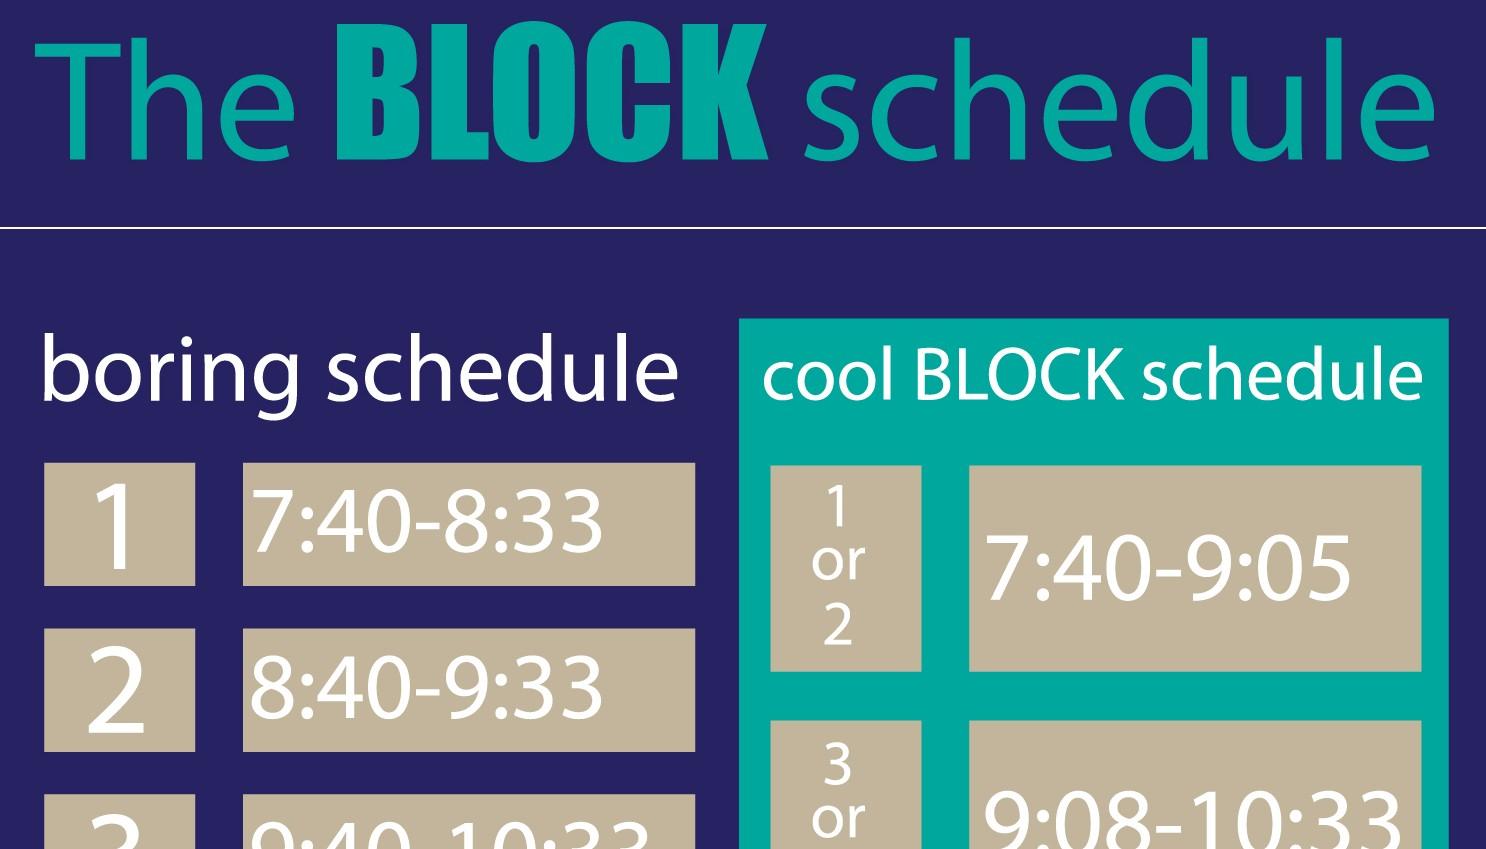 Teachers Have Mixed Reactions on Potential Switch to Block Schedule